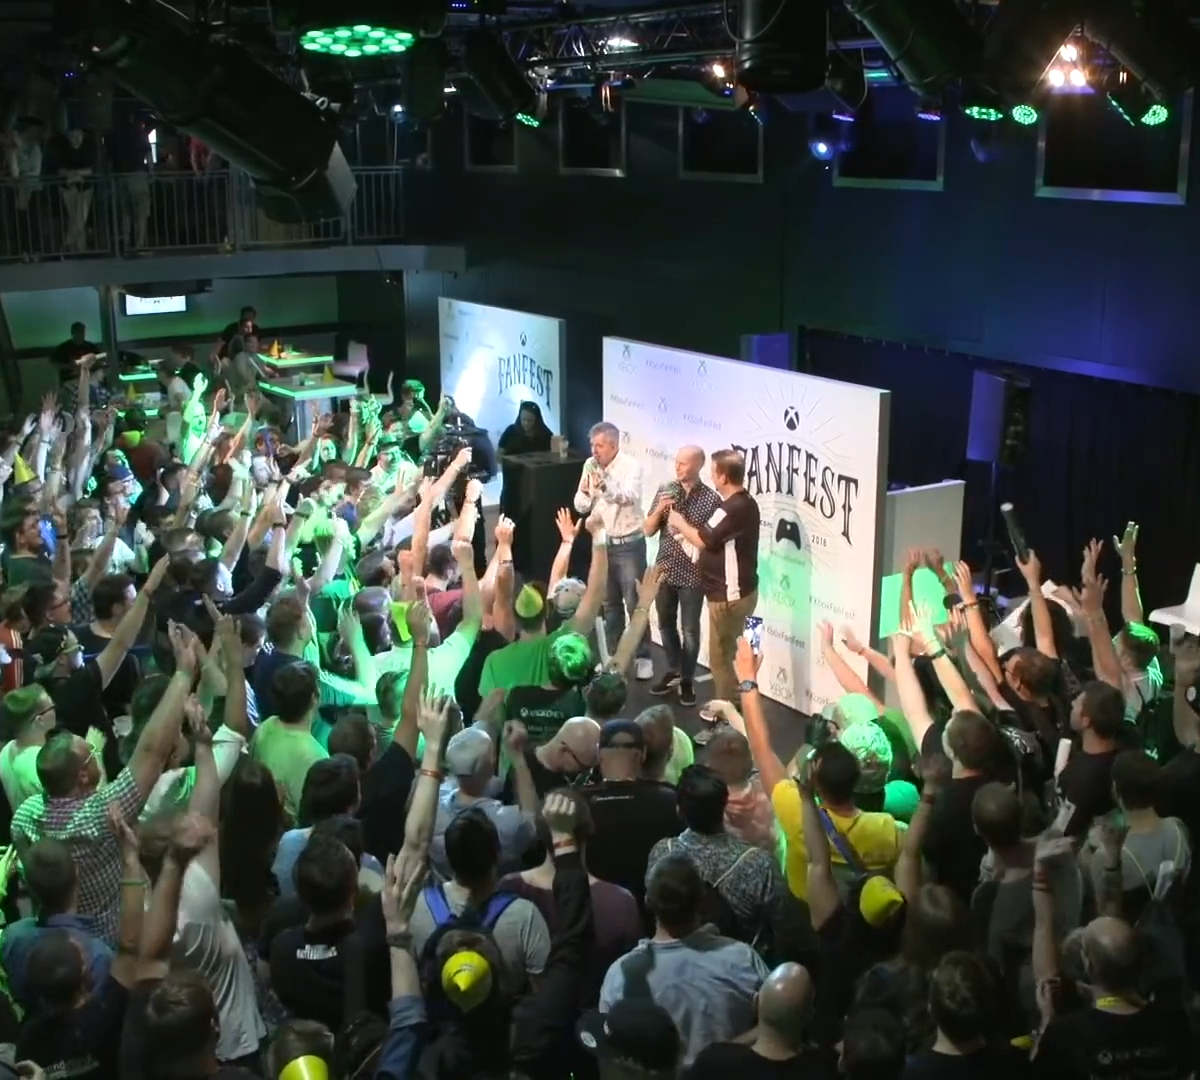 Gamescom x Xbox - Attention Seekers - Live Event